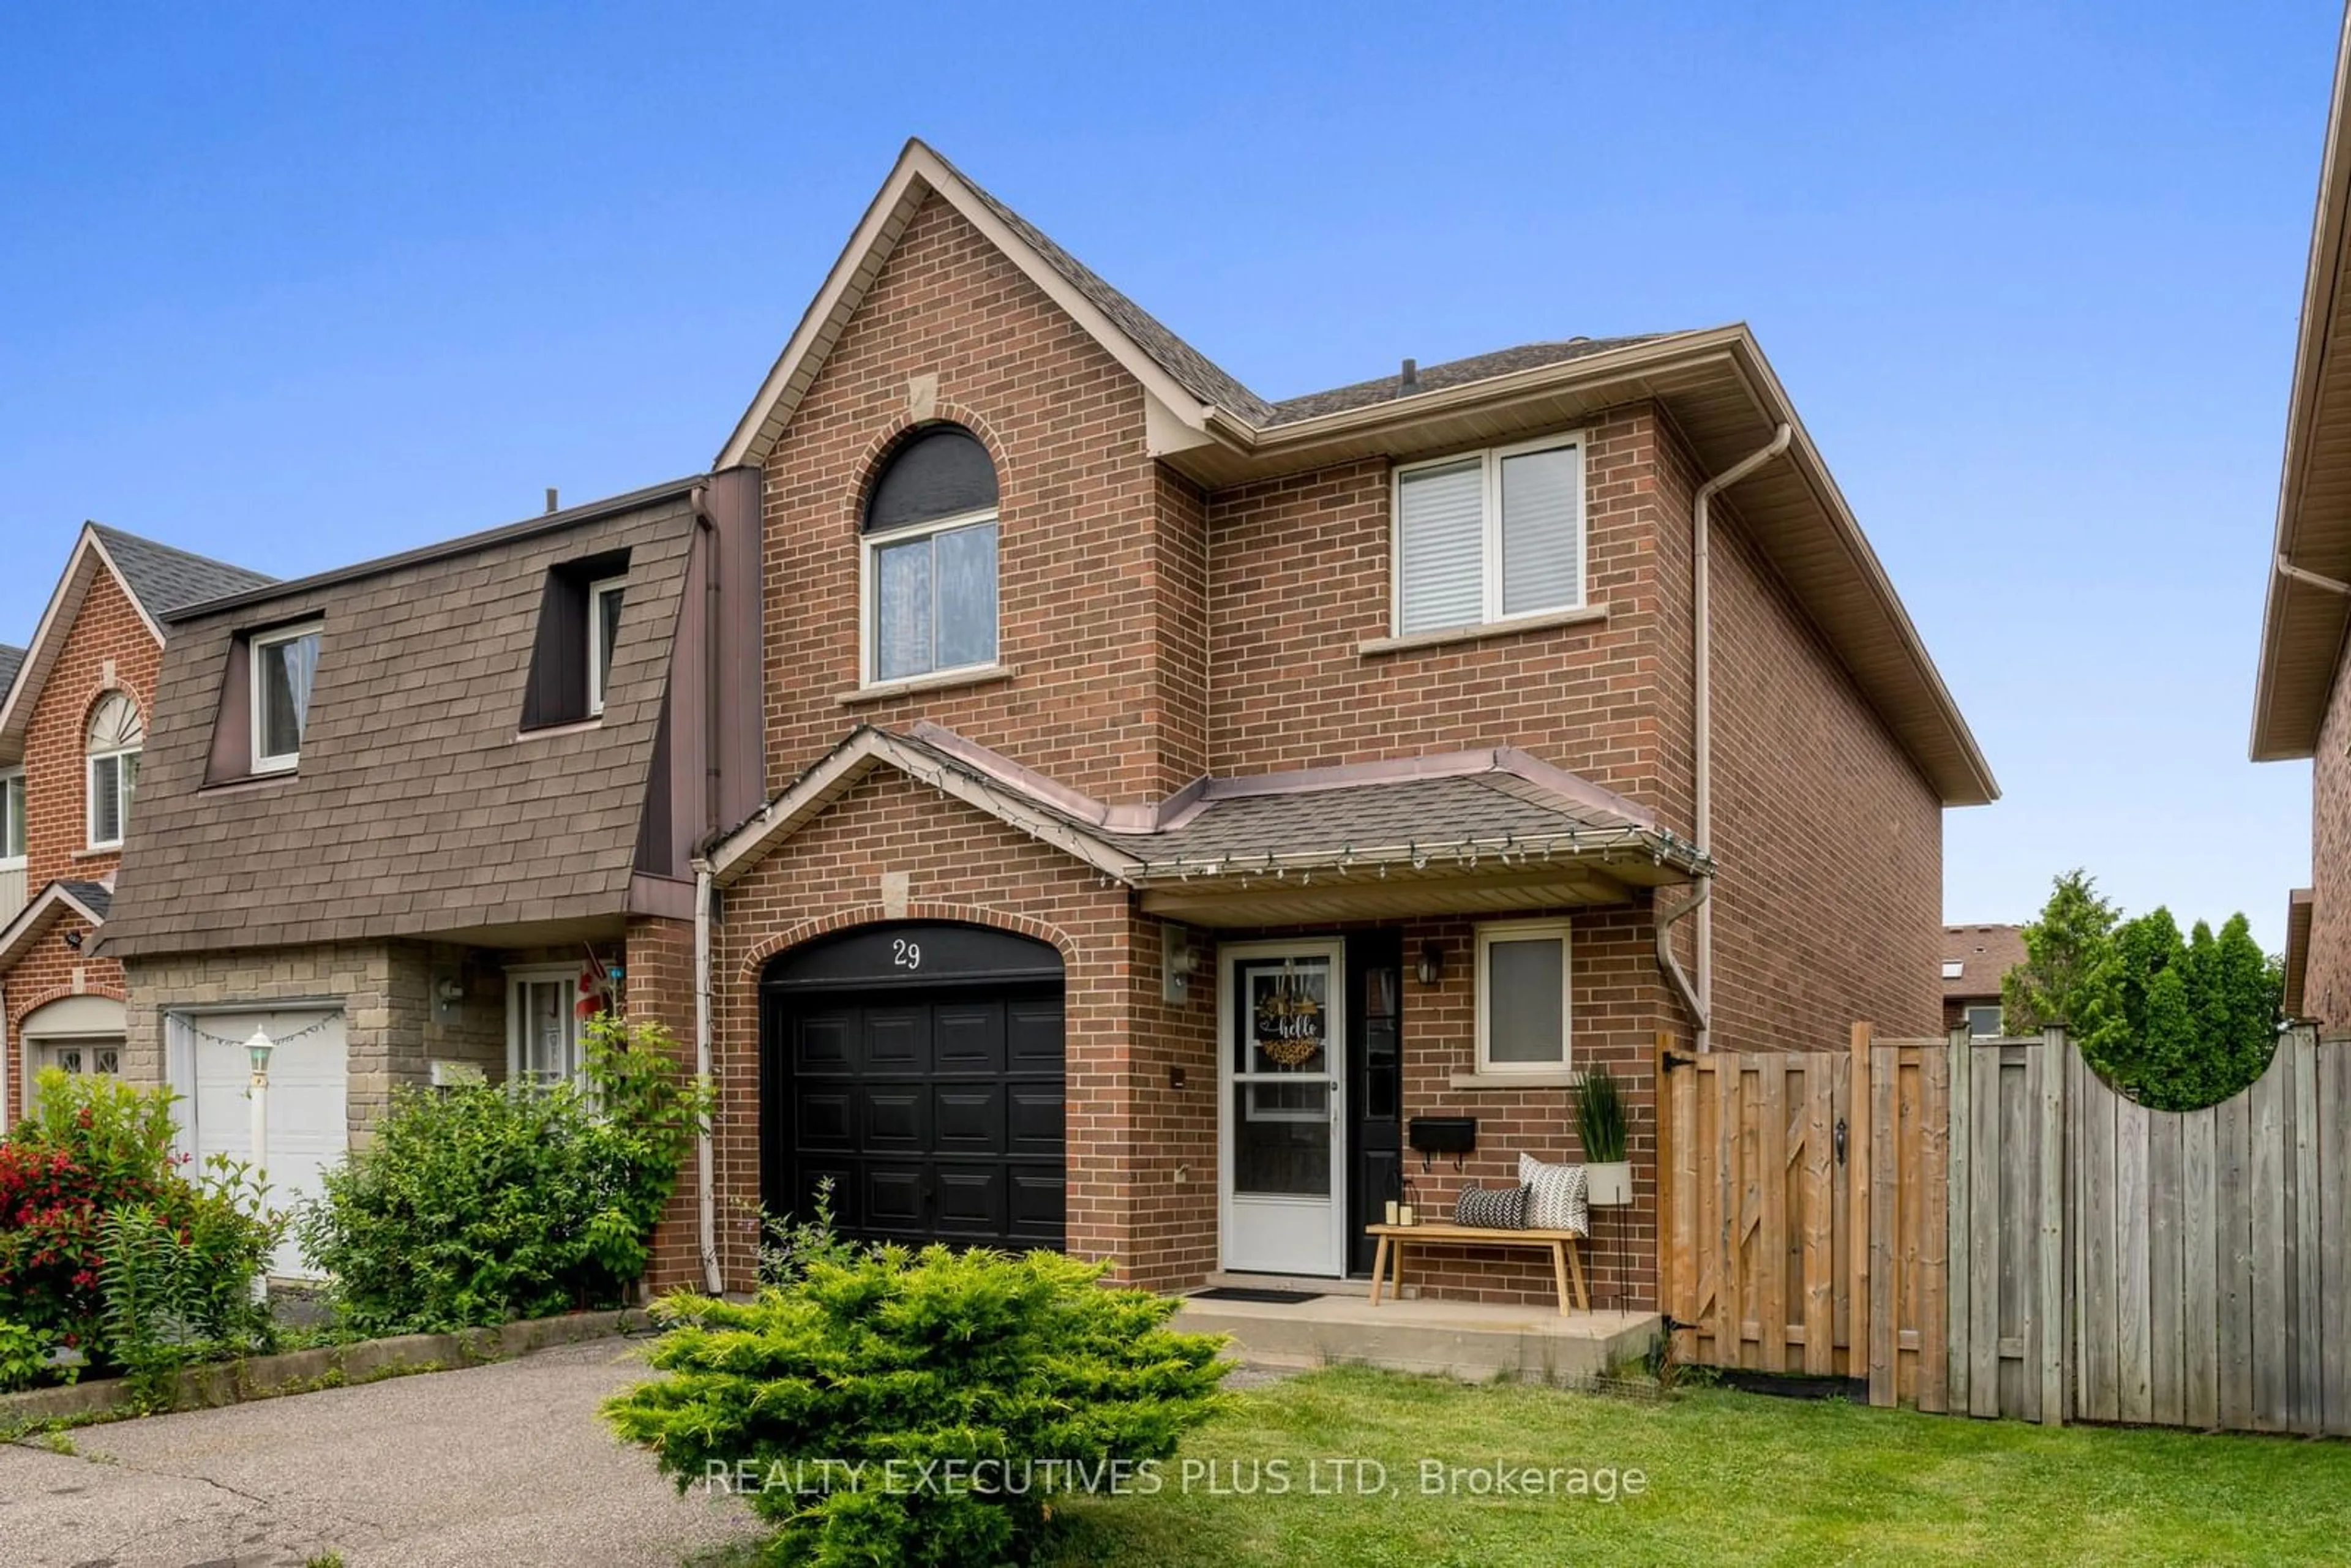 Home with brick exterior material for 29 Perthshire Crt, Hamilton Ontario L9B 2H1